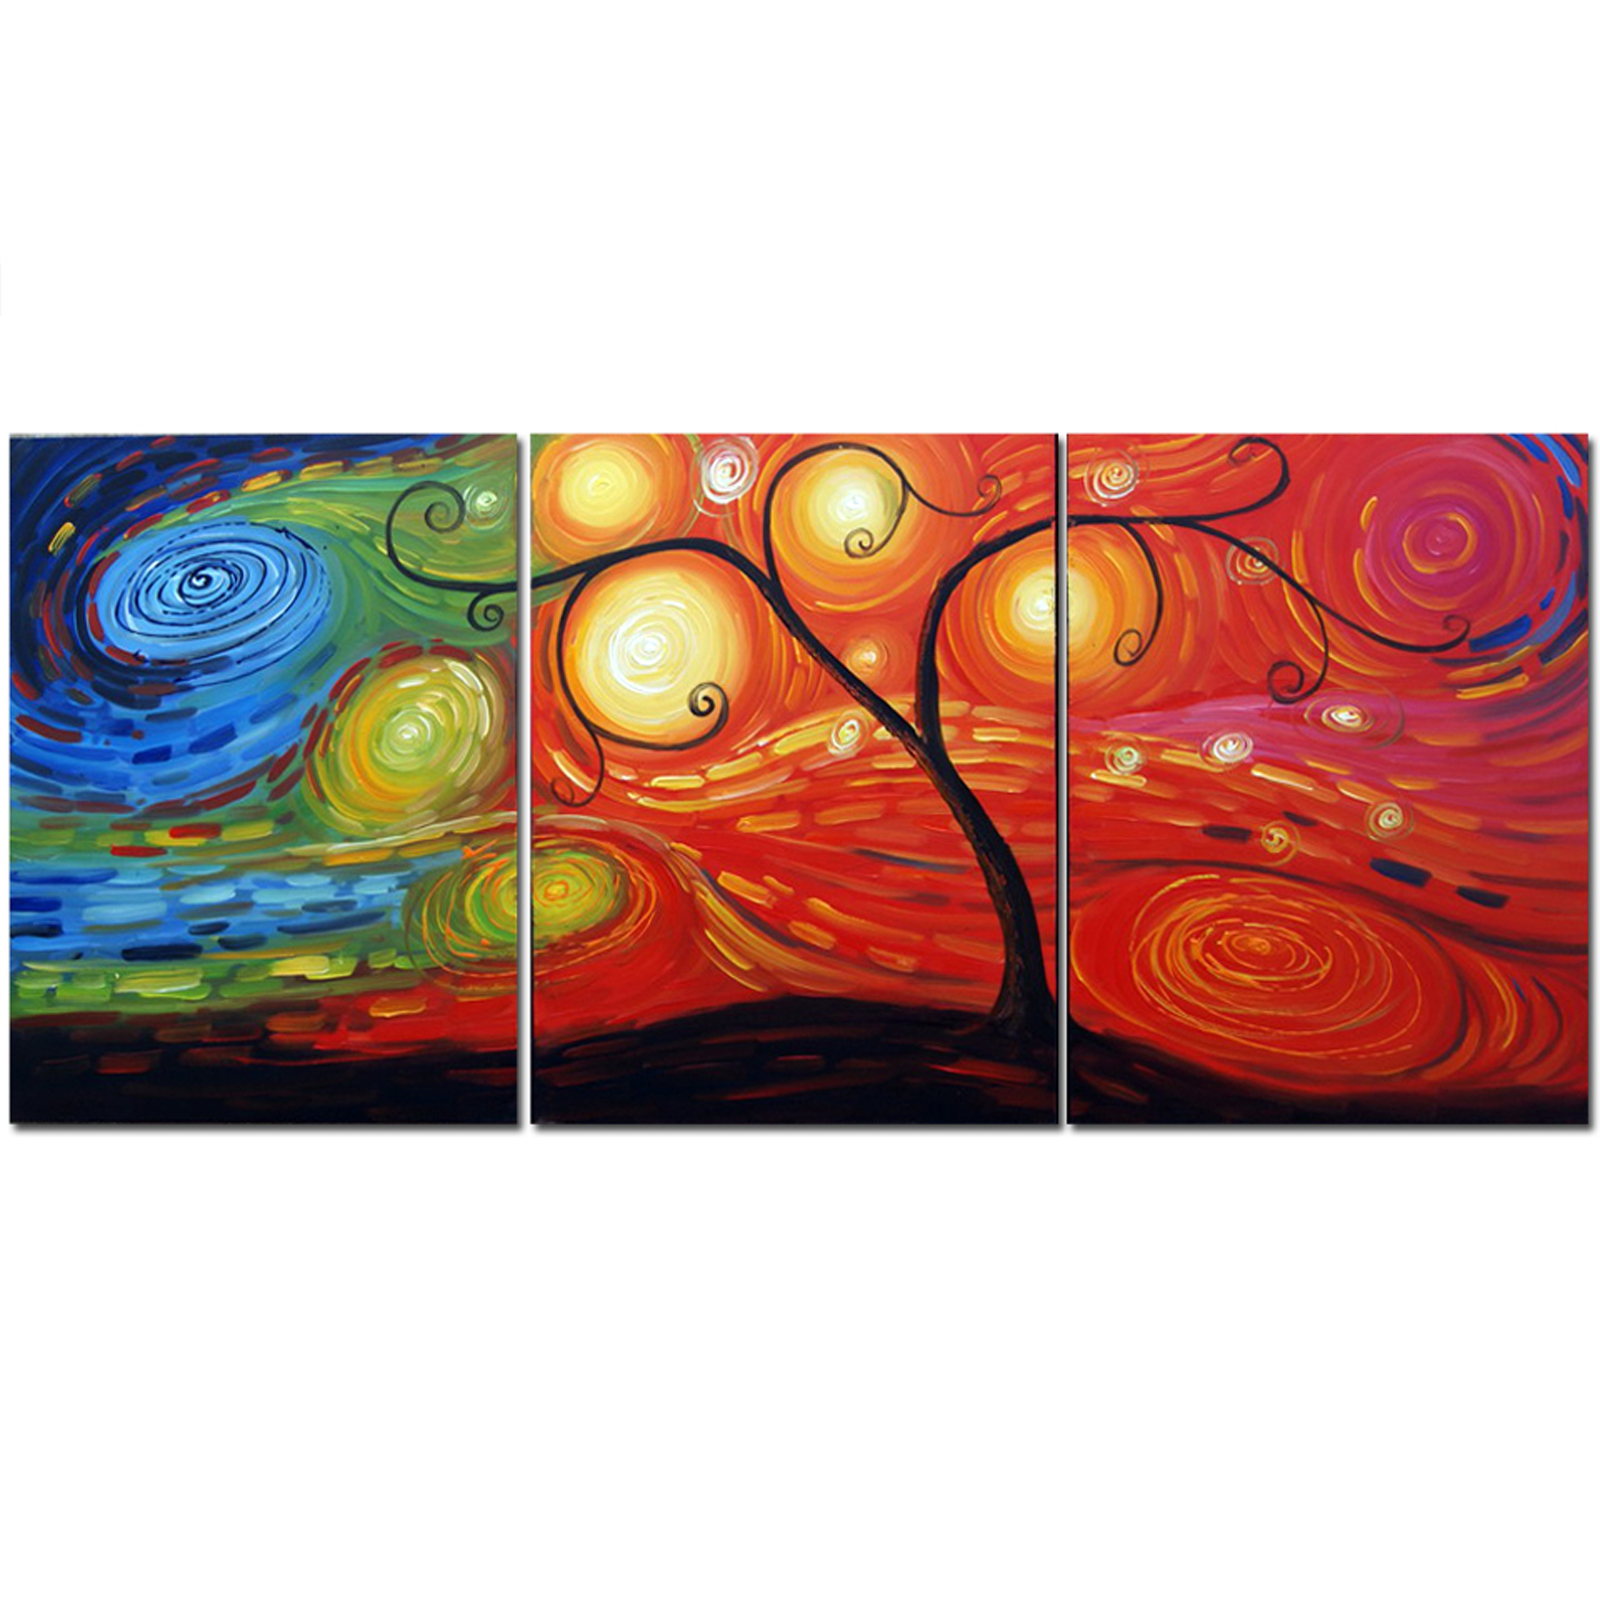 Psychedelic Modern Tree Painting - 60 x 24 in - 3 Panels